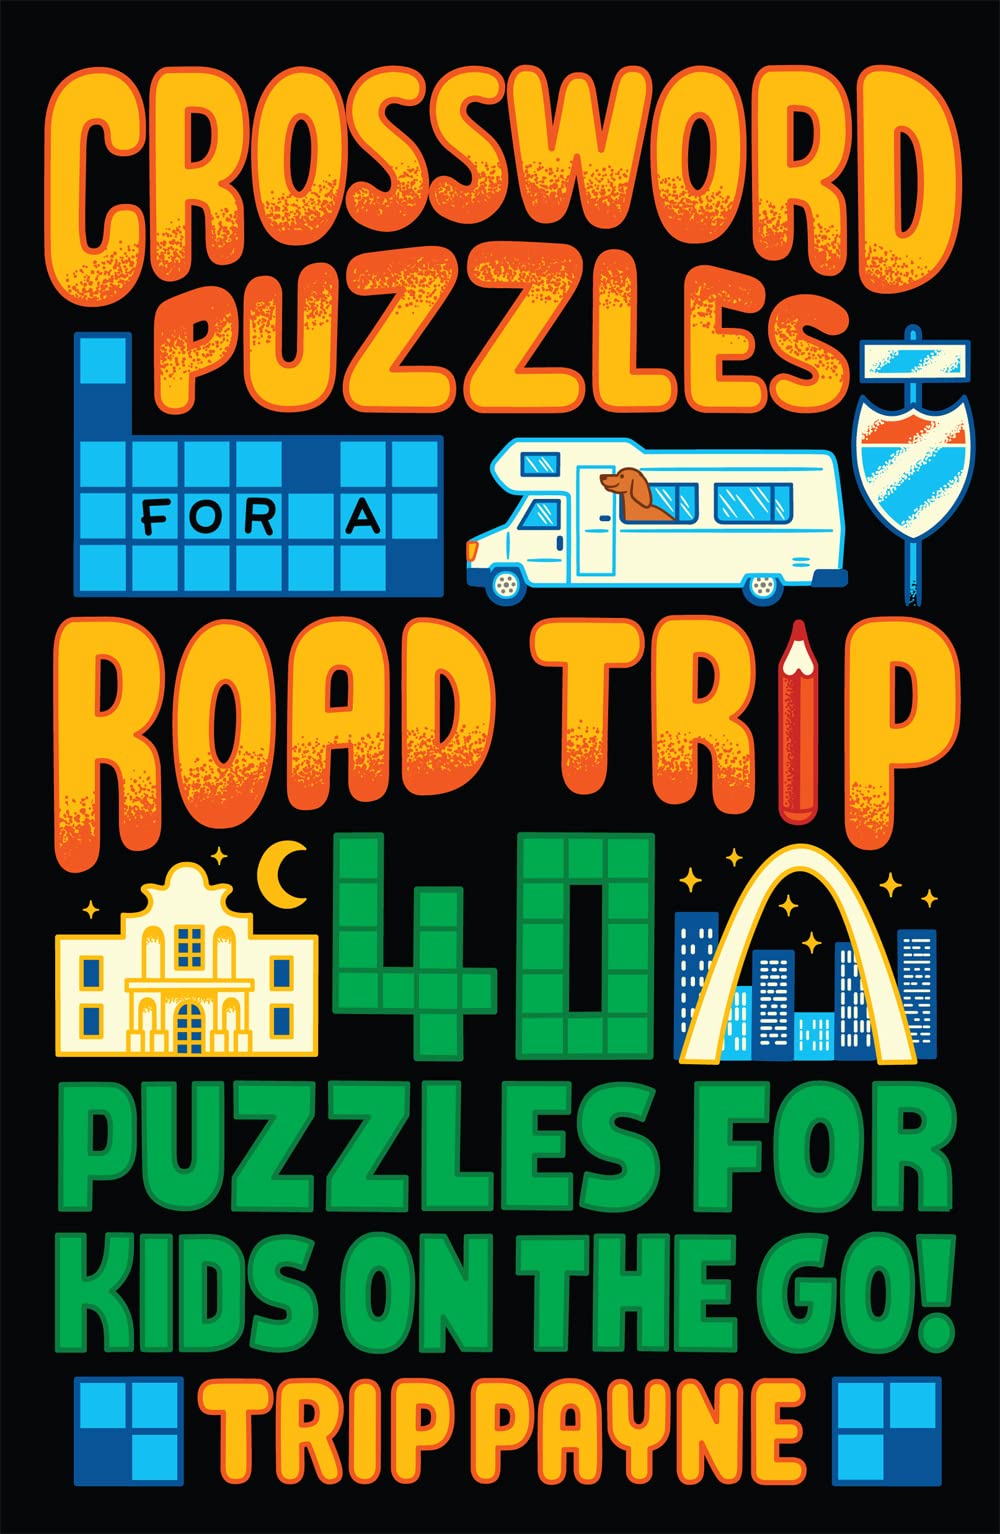 Crossword Puzzles for a Road Trip: 40 Puzzles for Kids on the Go! Cover